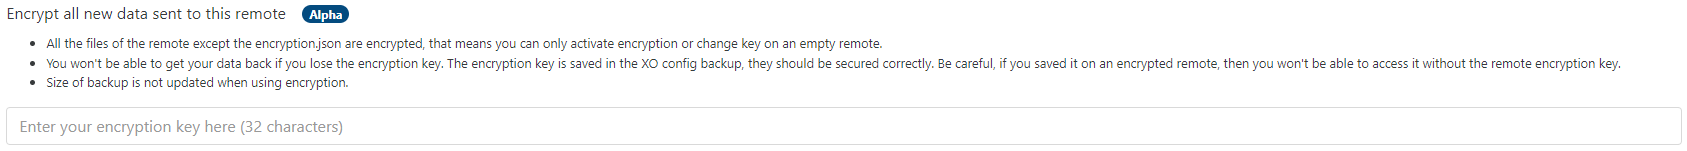 Remote_encryption.png